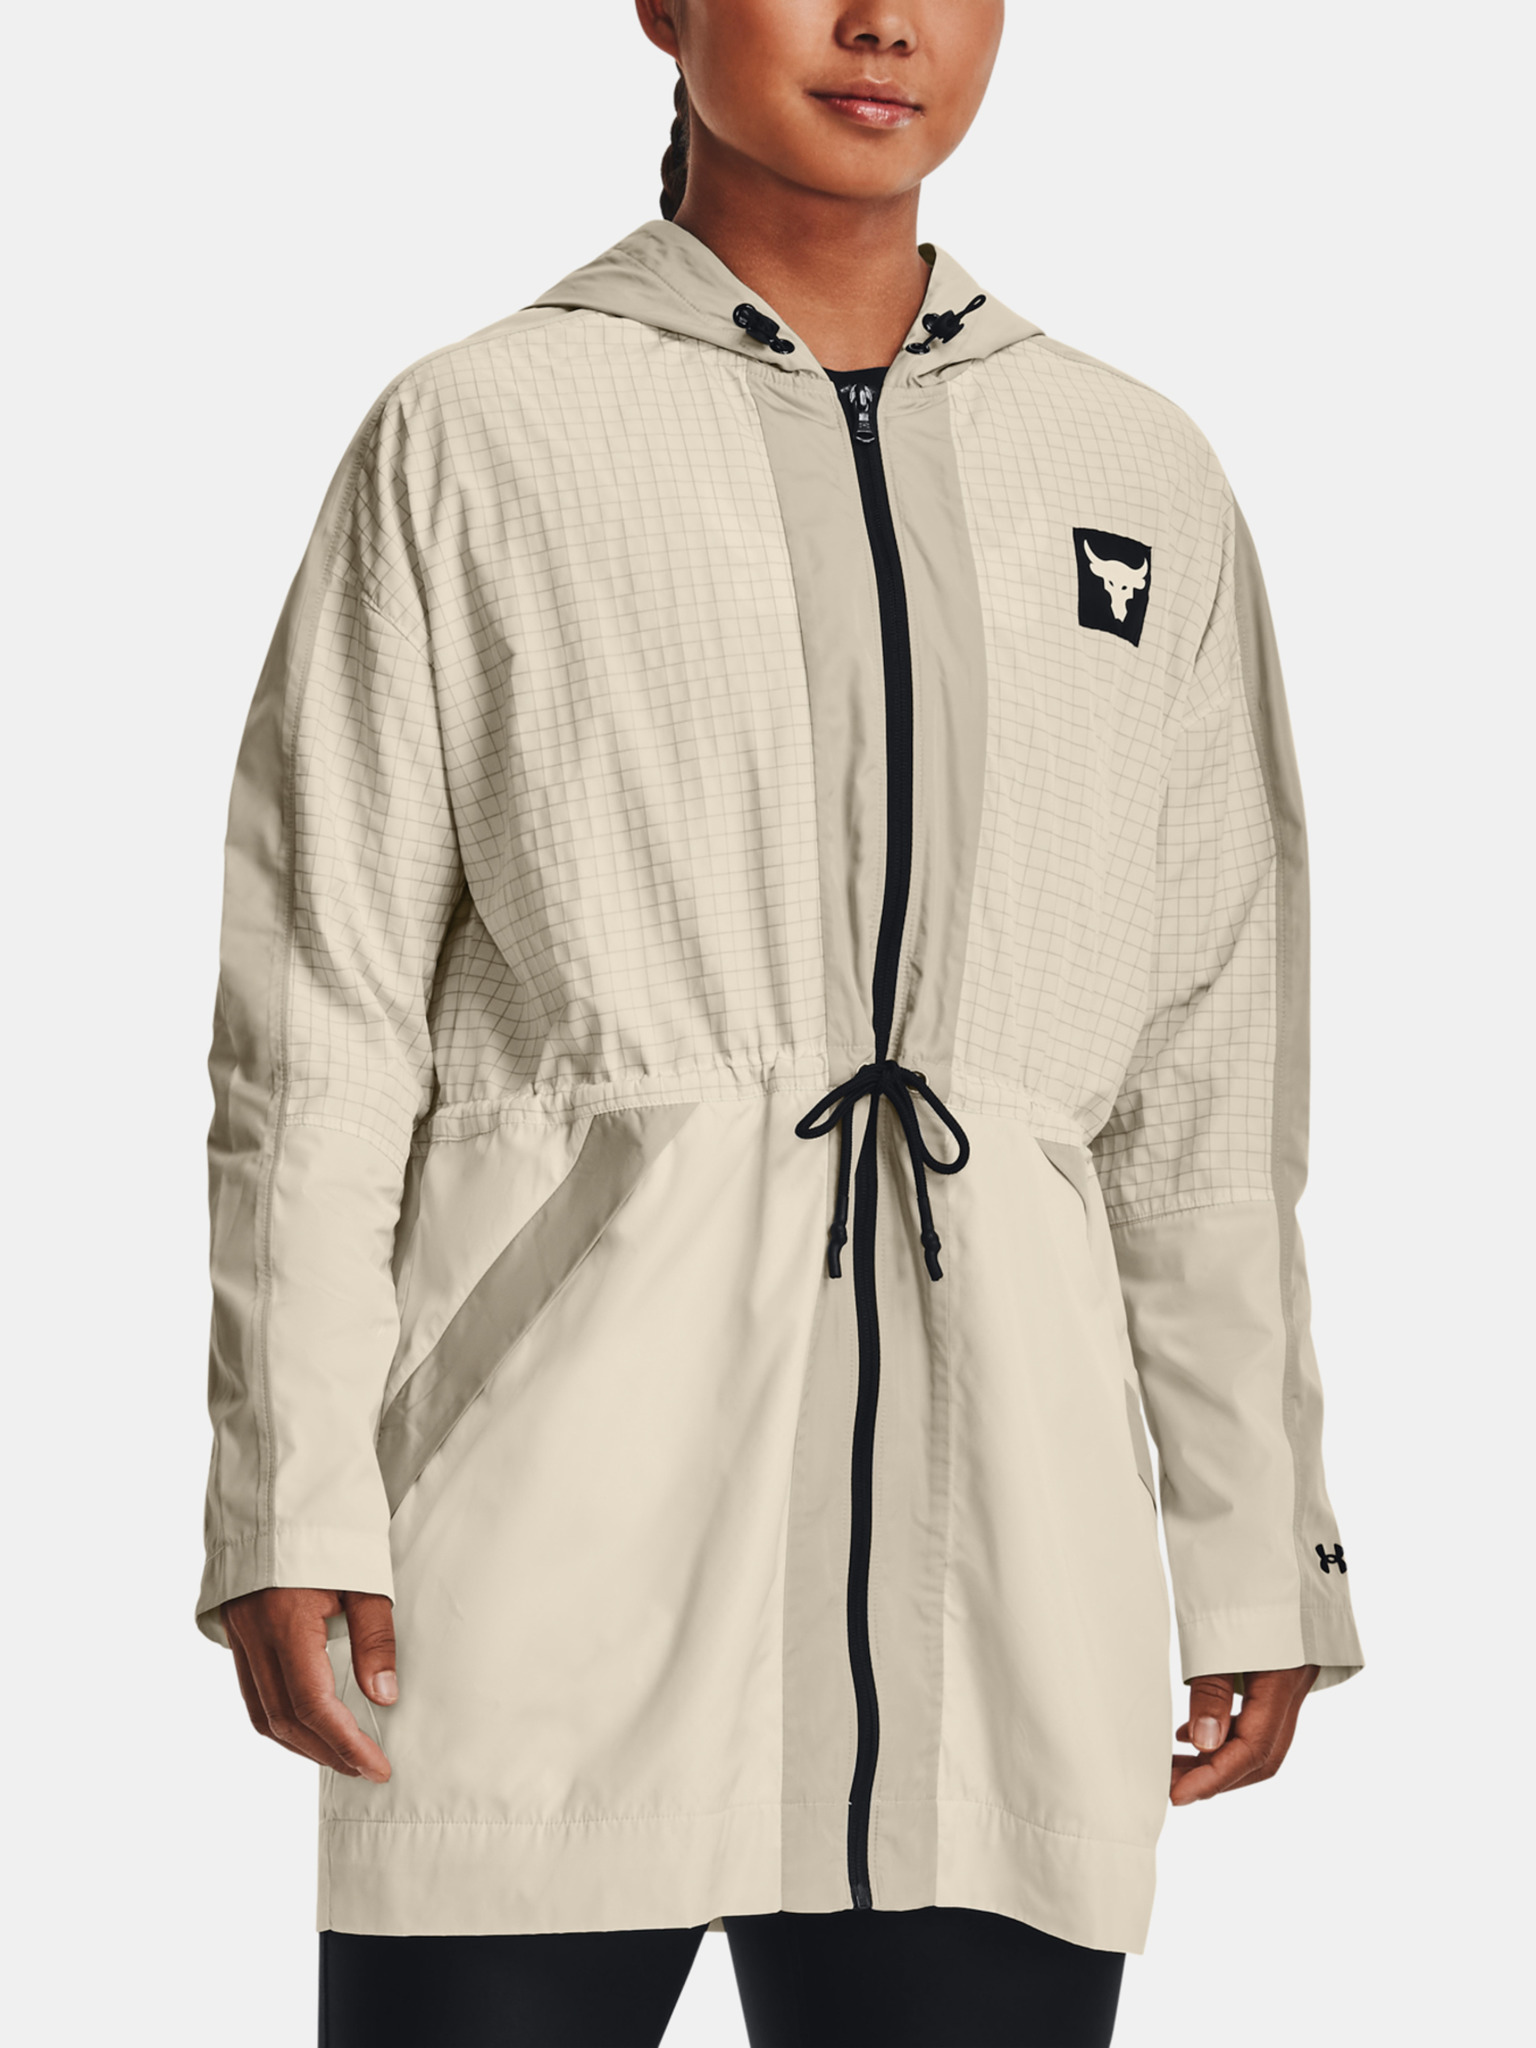 Under Armour - UA Project Rock Woven Jacket